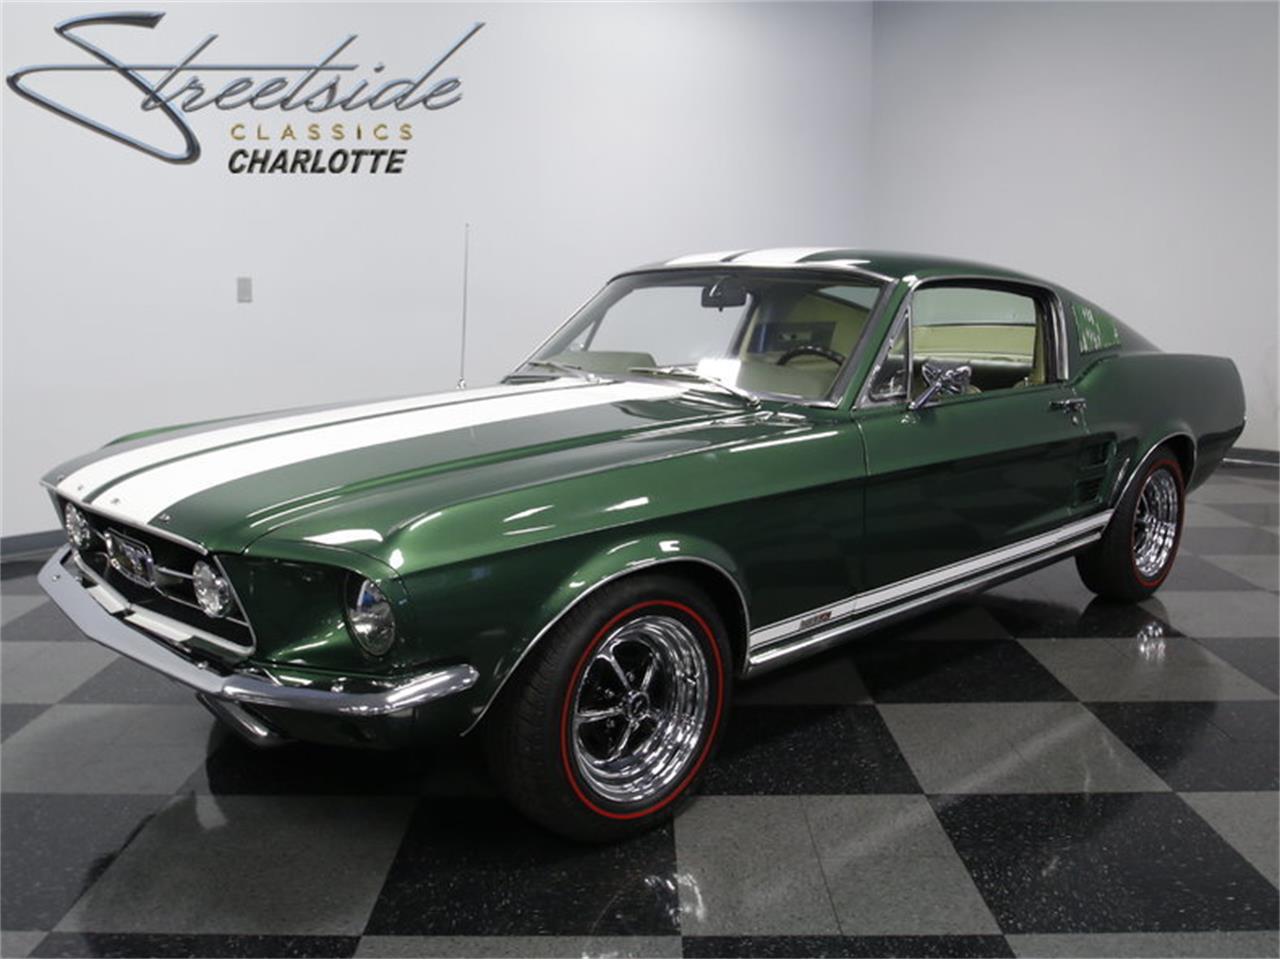 1967 Ford Mustang GTA Fastback for Sale | ClassicCars.com ...